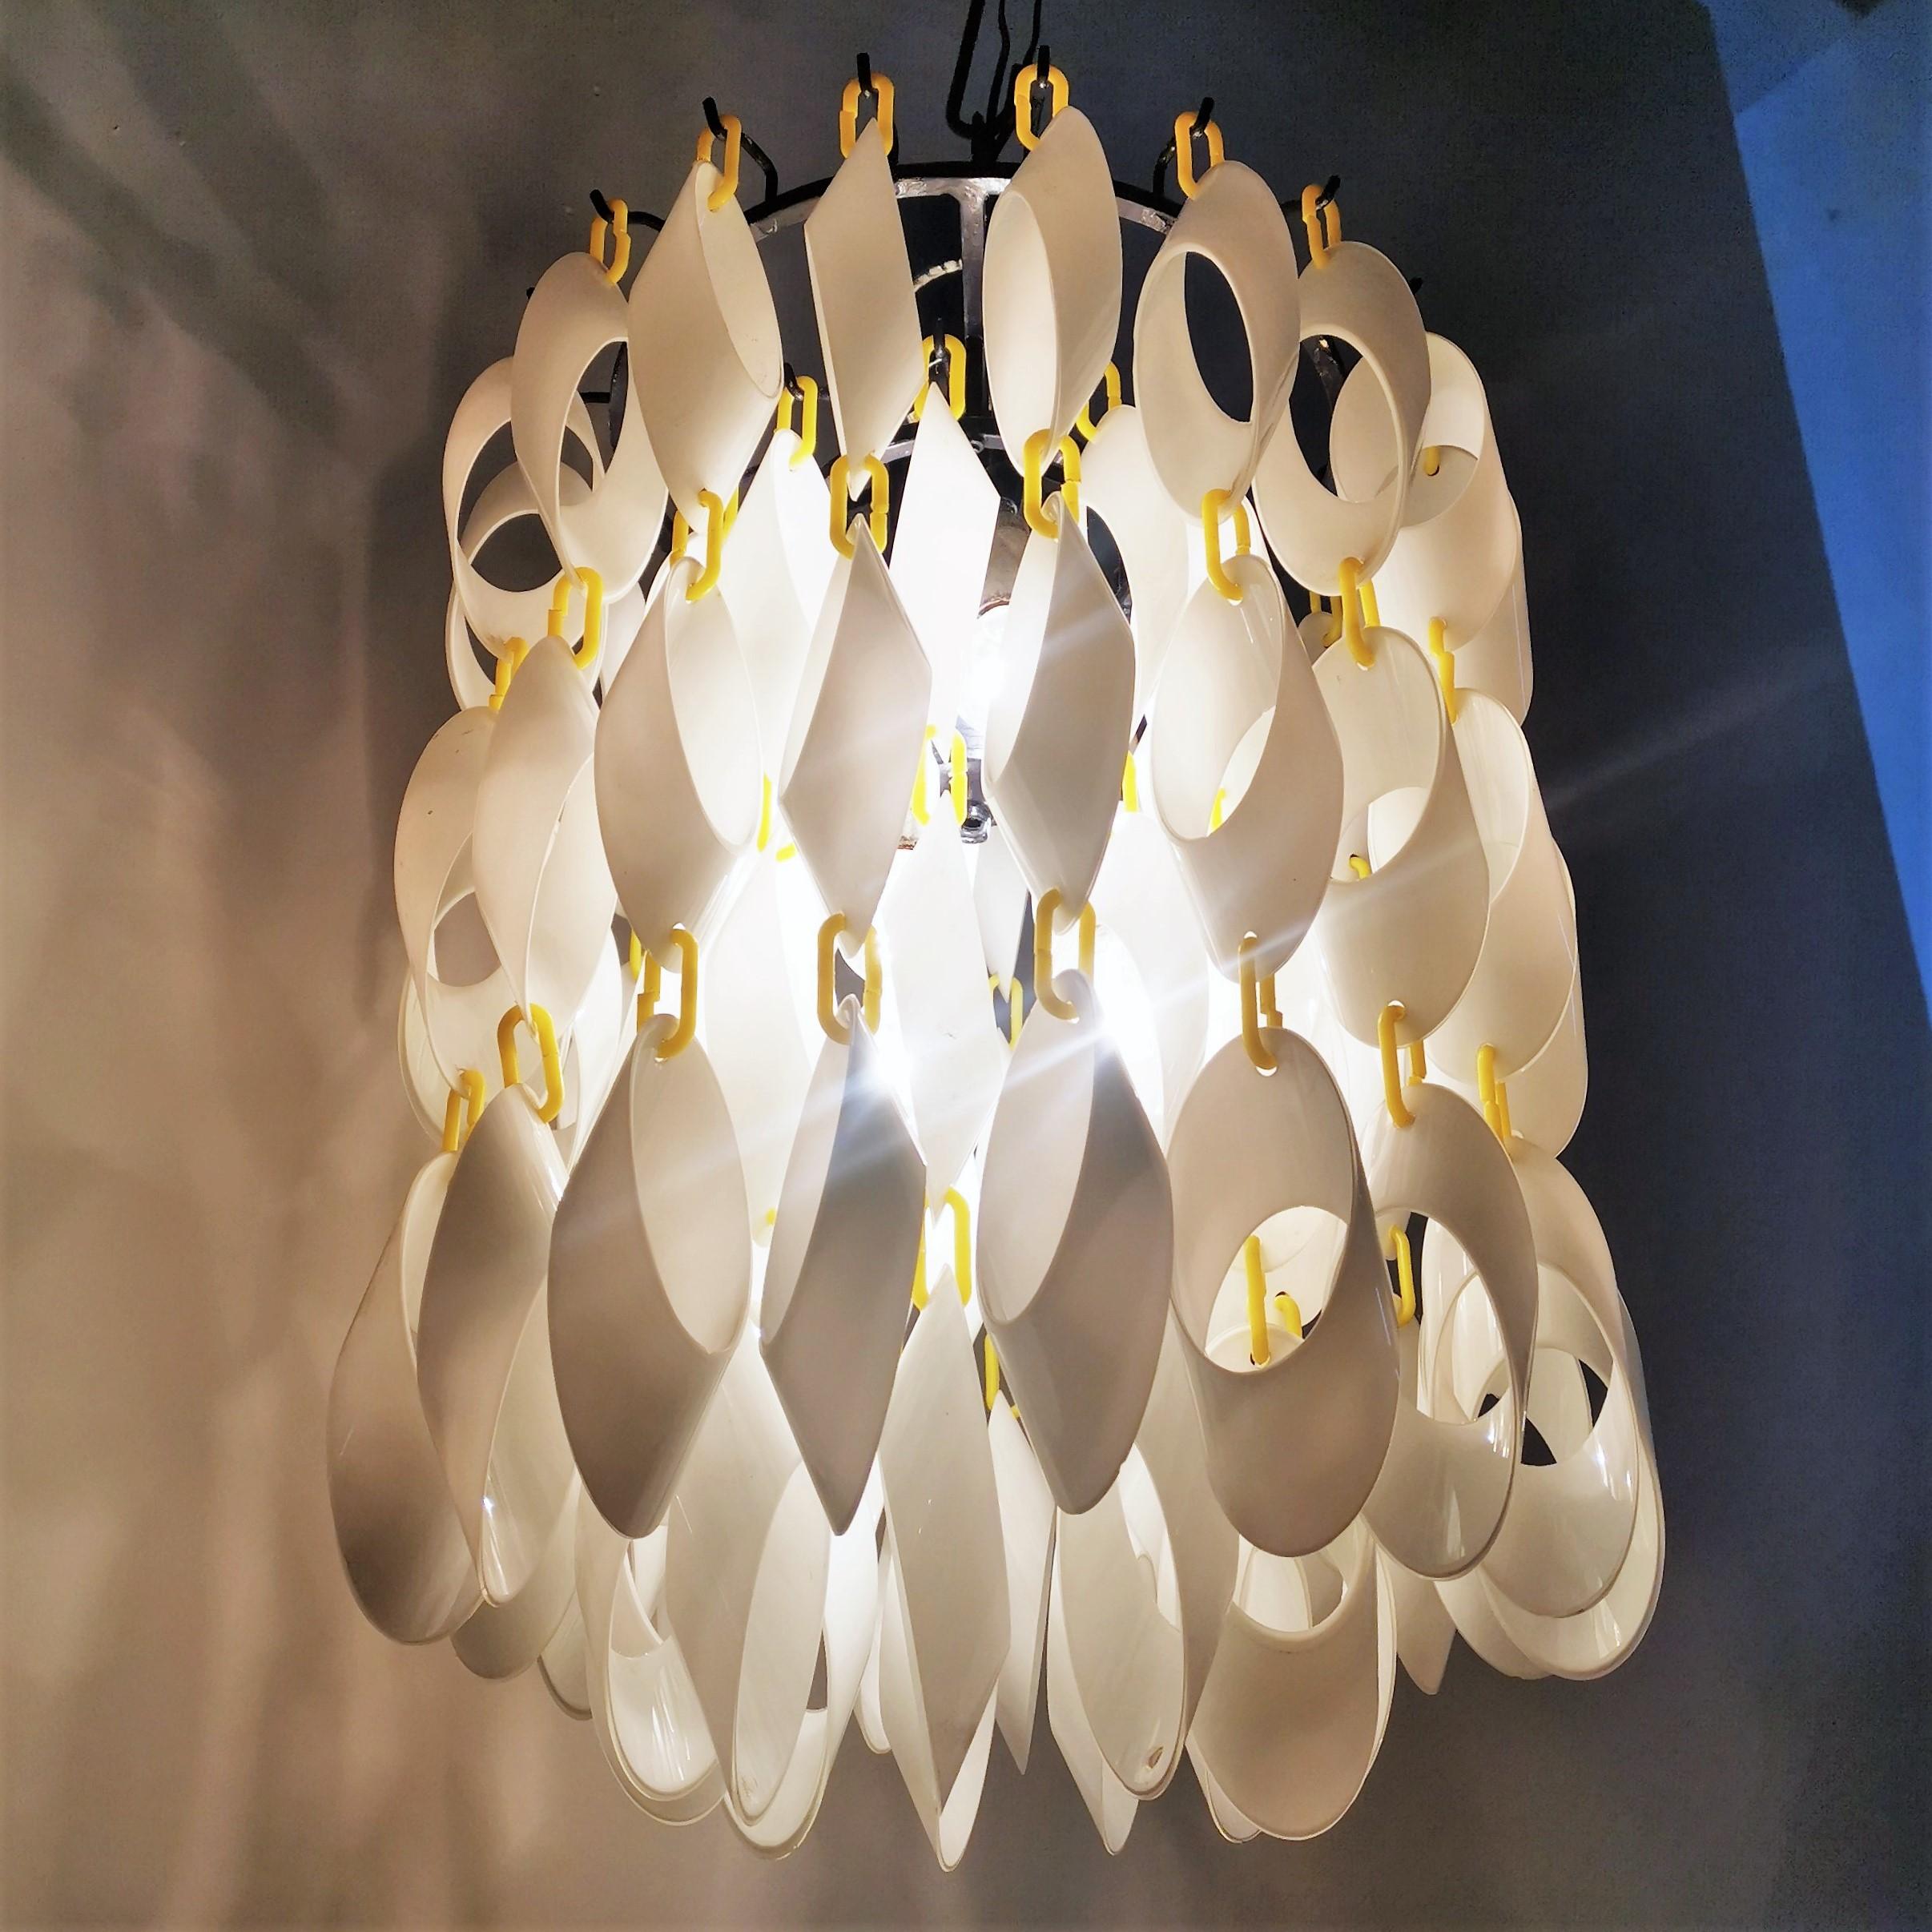 Mid-Century Vistosi Glass Chandelier Made of Modular Elements 1960s Italy For Sale 1